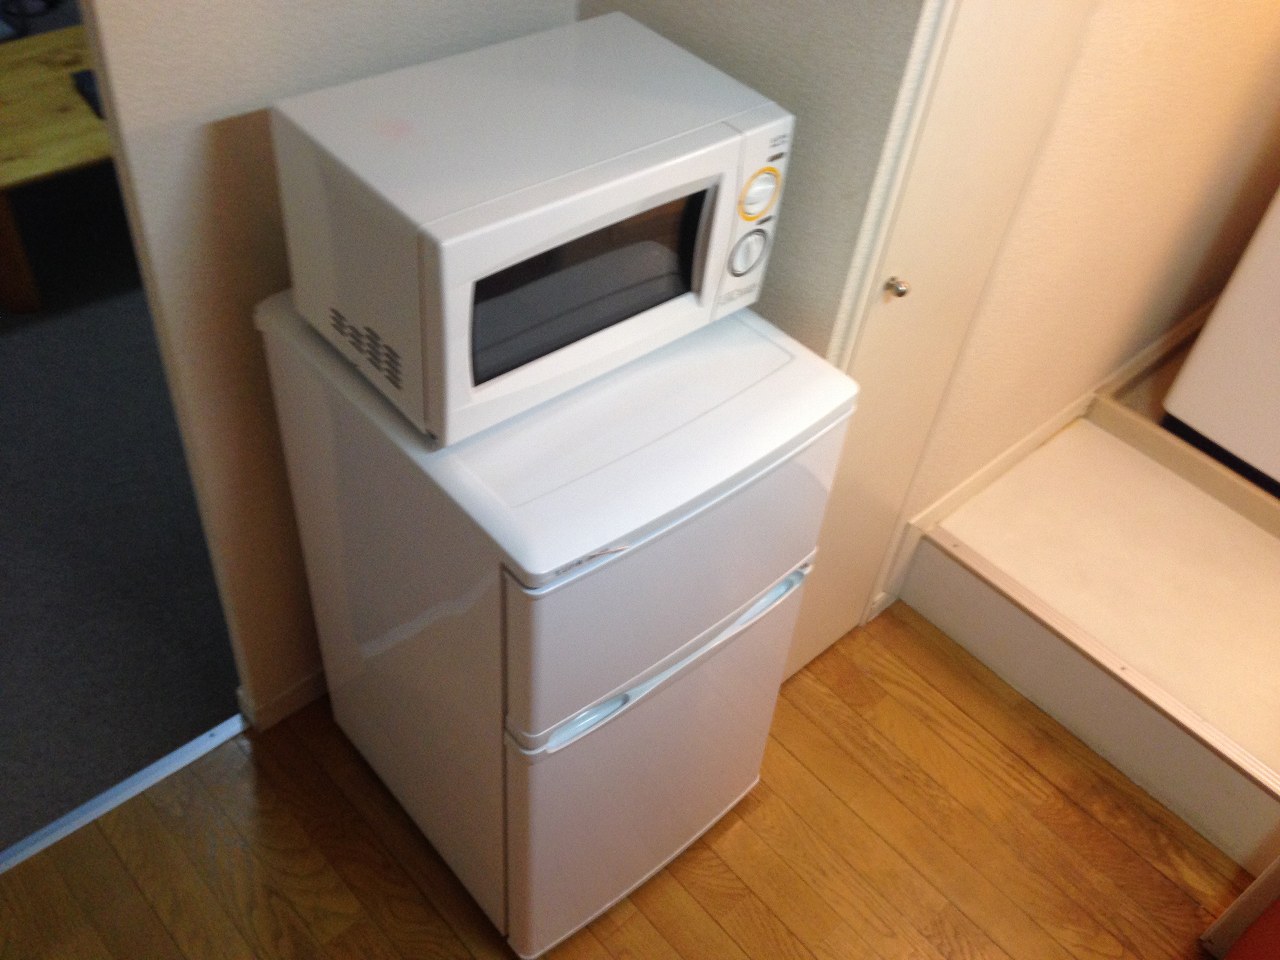 Other Equipment. microwave, Also it comes with a refrigerator.